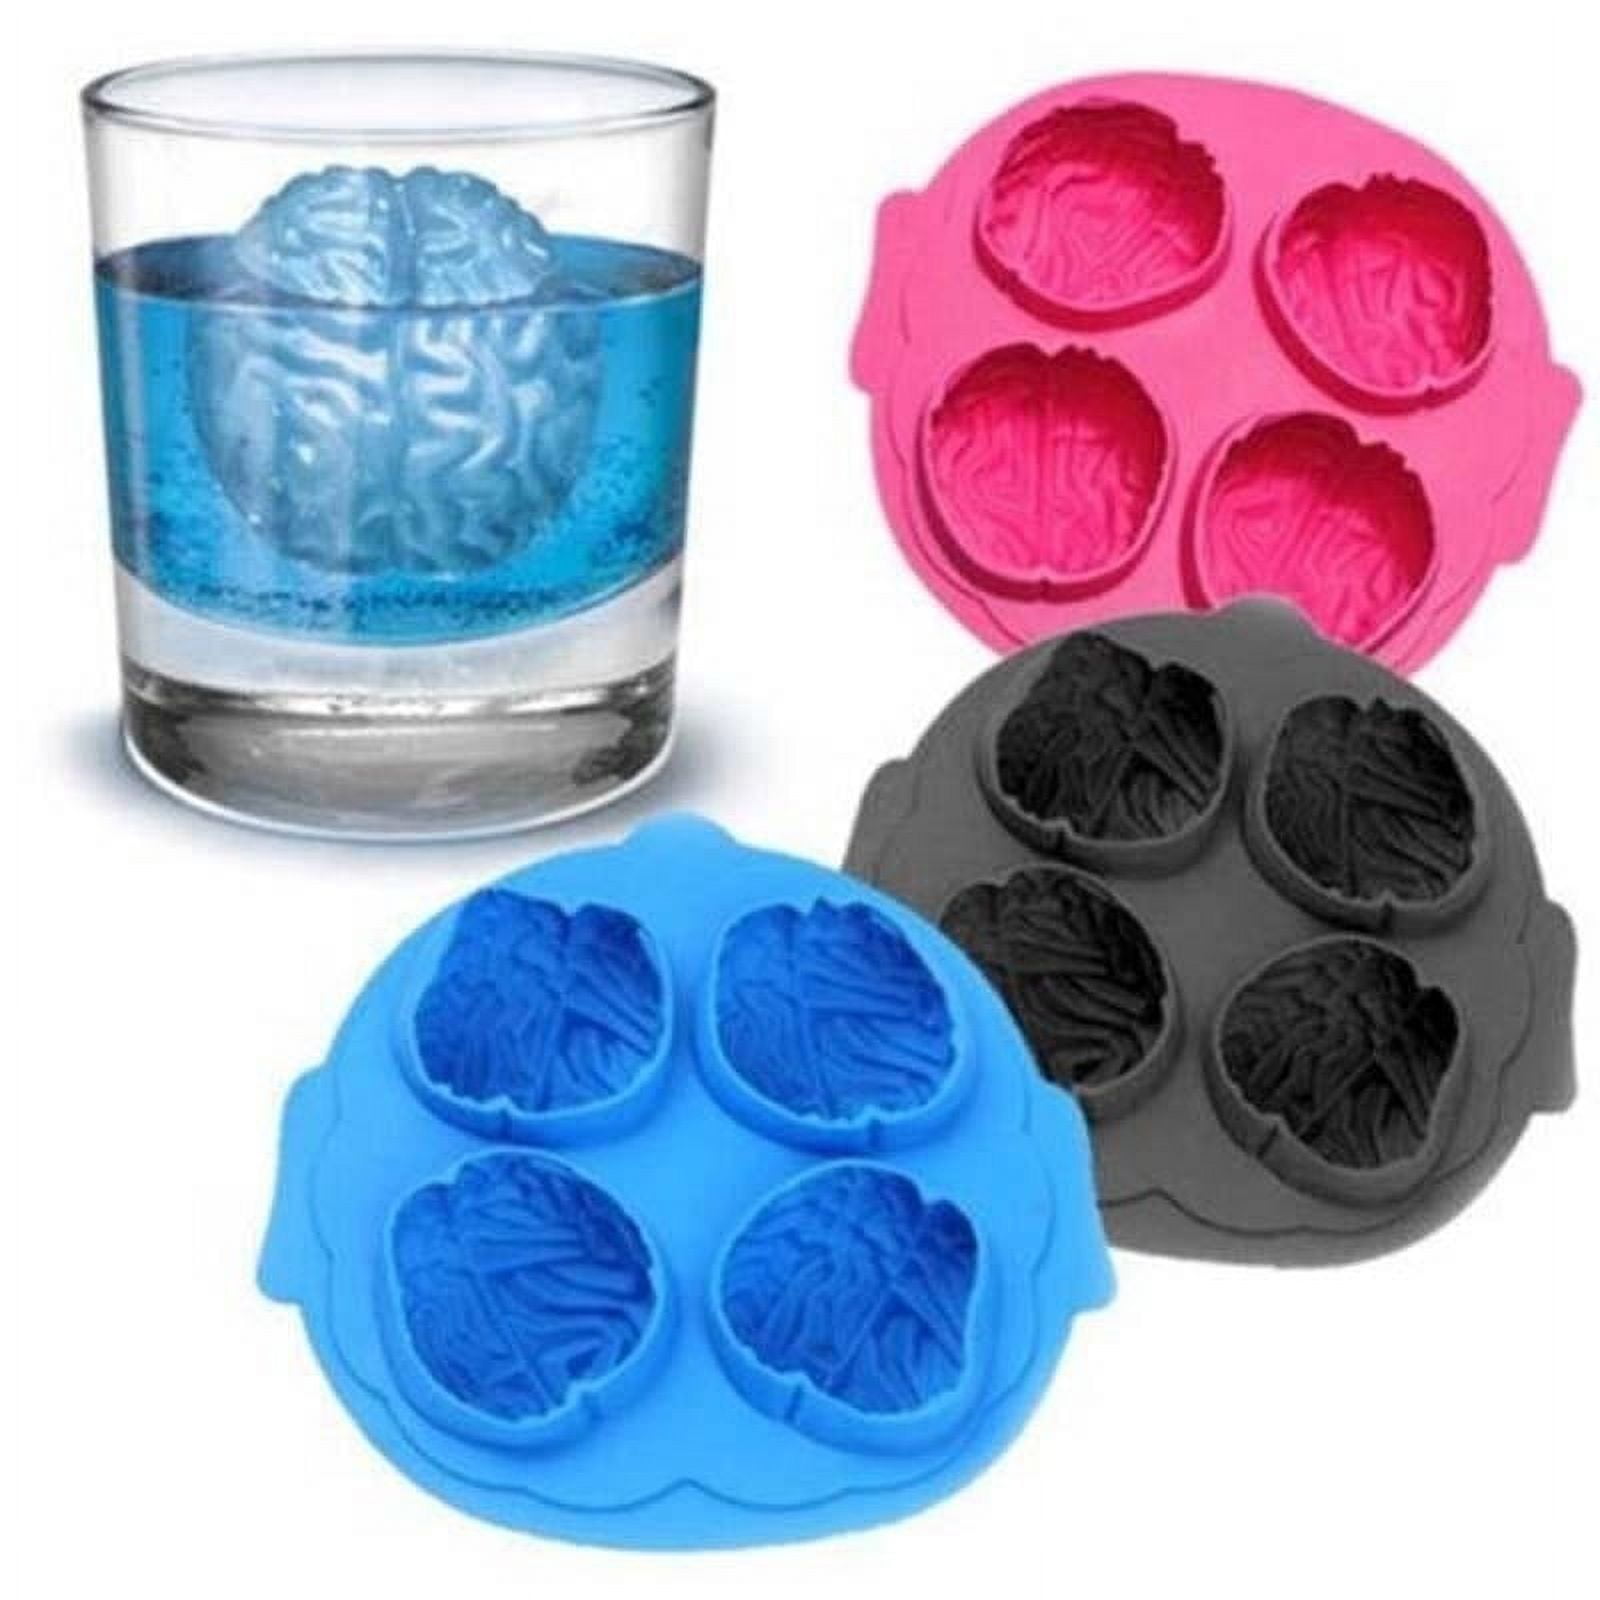 Ice Cube Maker 3D Mold Brain. Bar Party Silicone Trays Fun Shapes Molds, Silicone  Mold for ice, chocolate cakes designs - Blue, New 